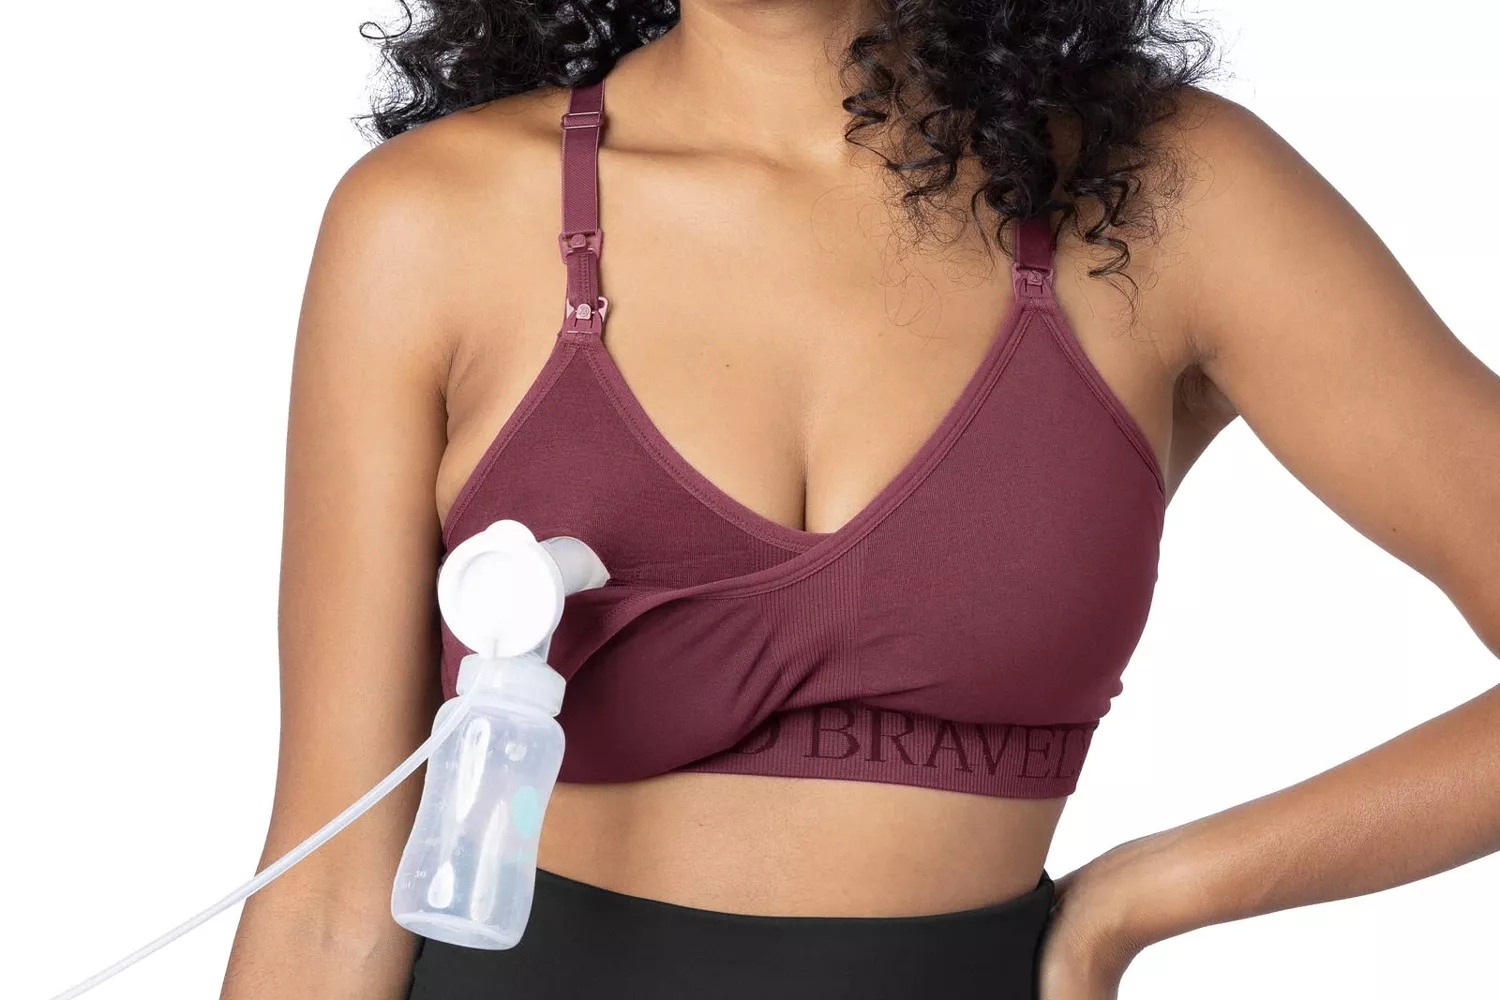 Kindred Bravely Sublime Hands-Free Sports Pumping Bra